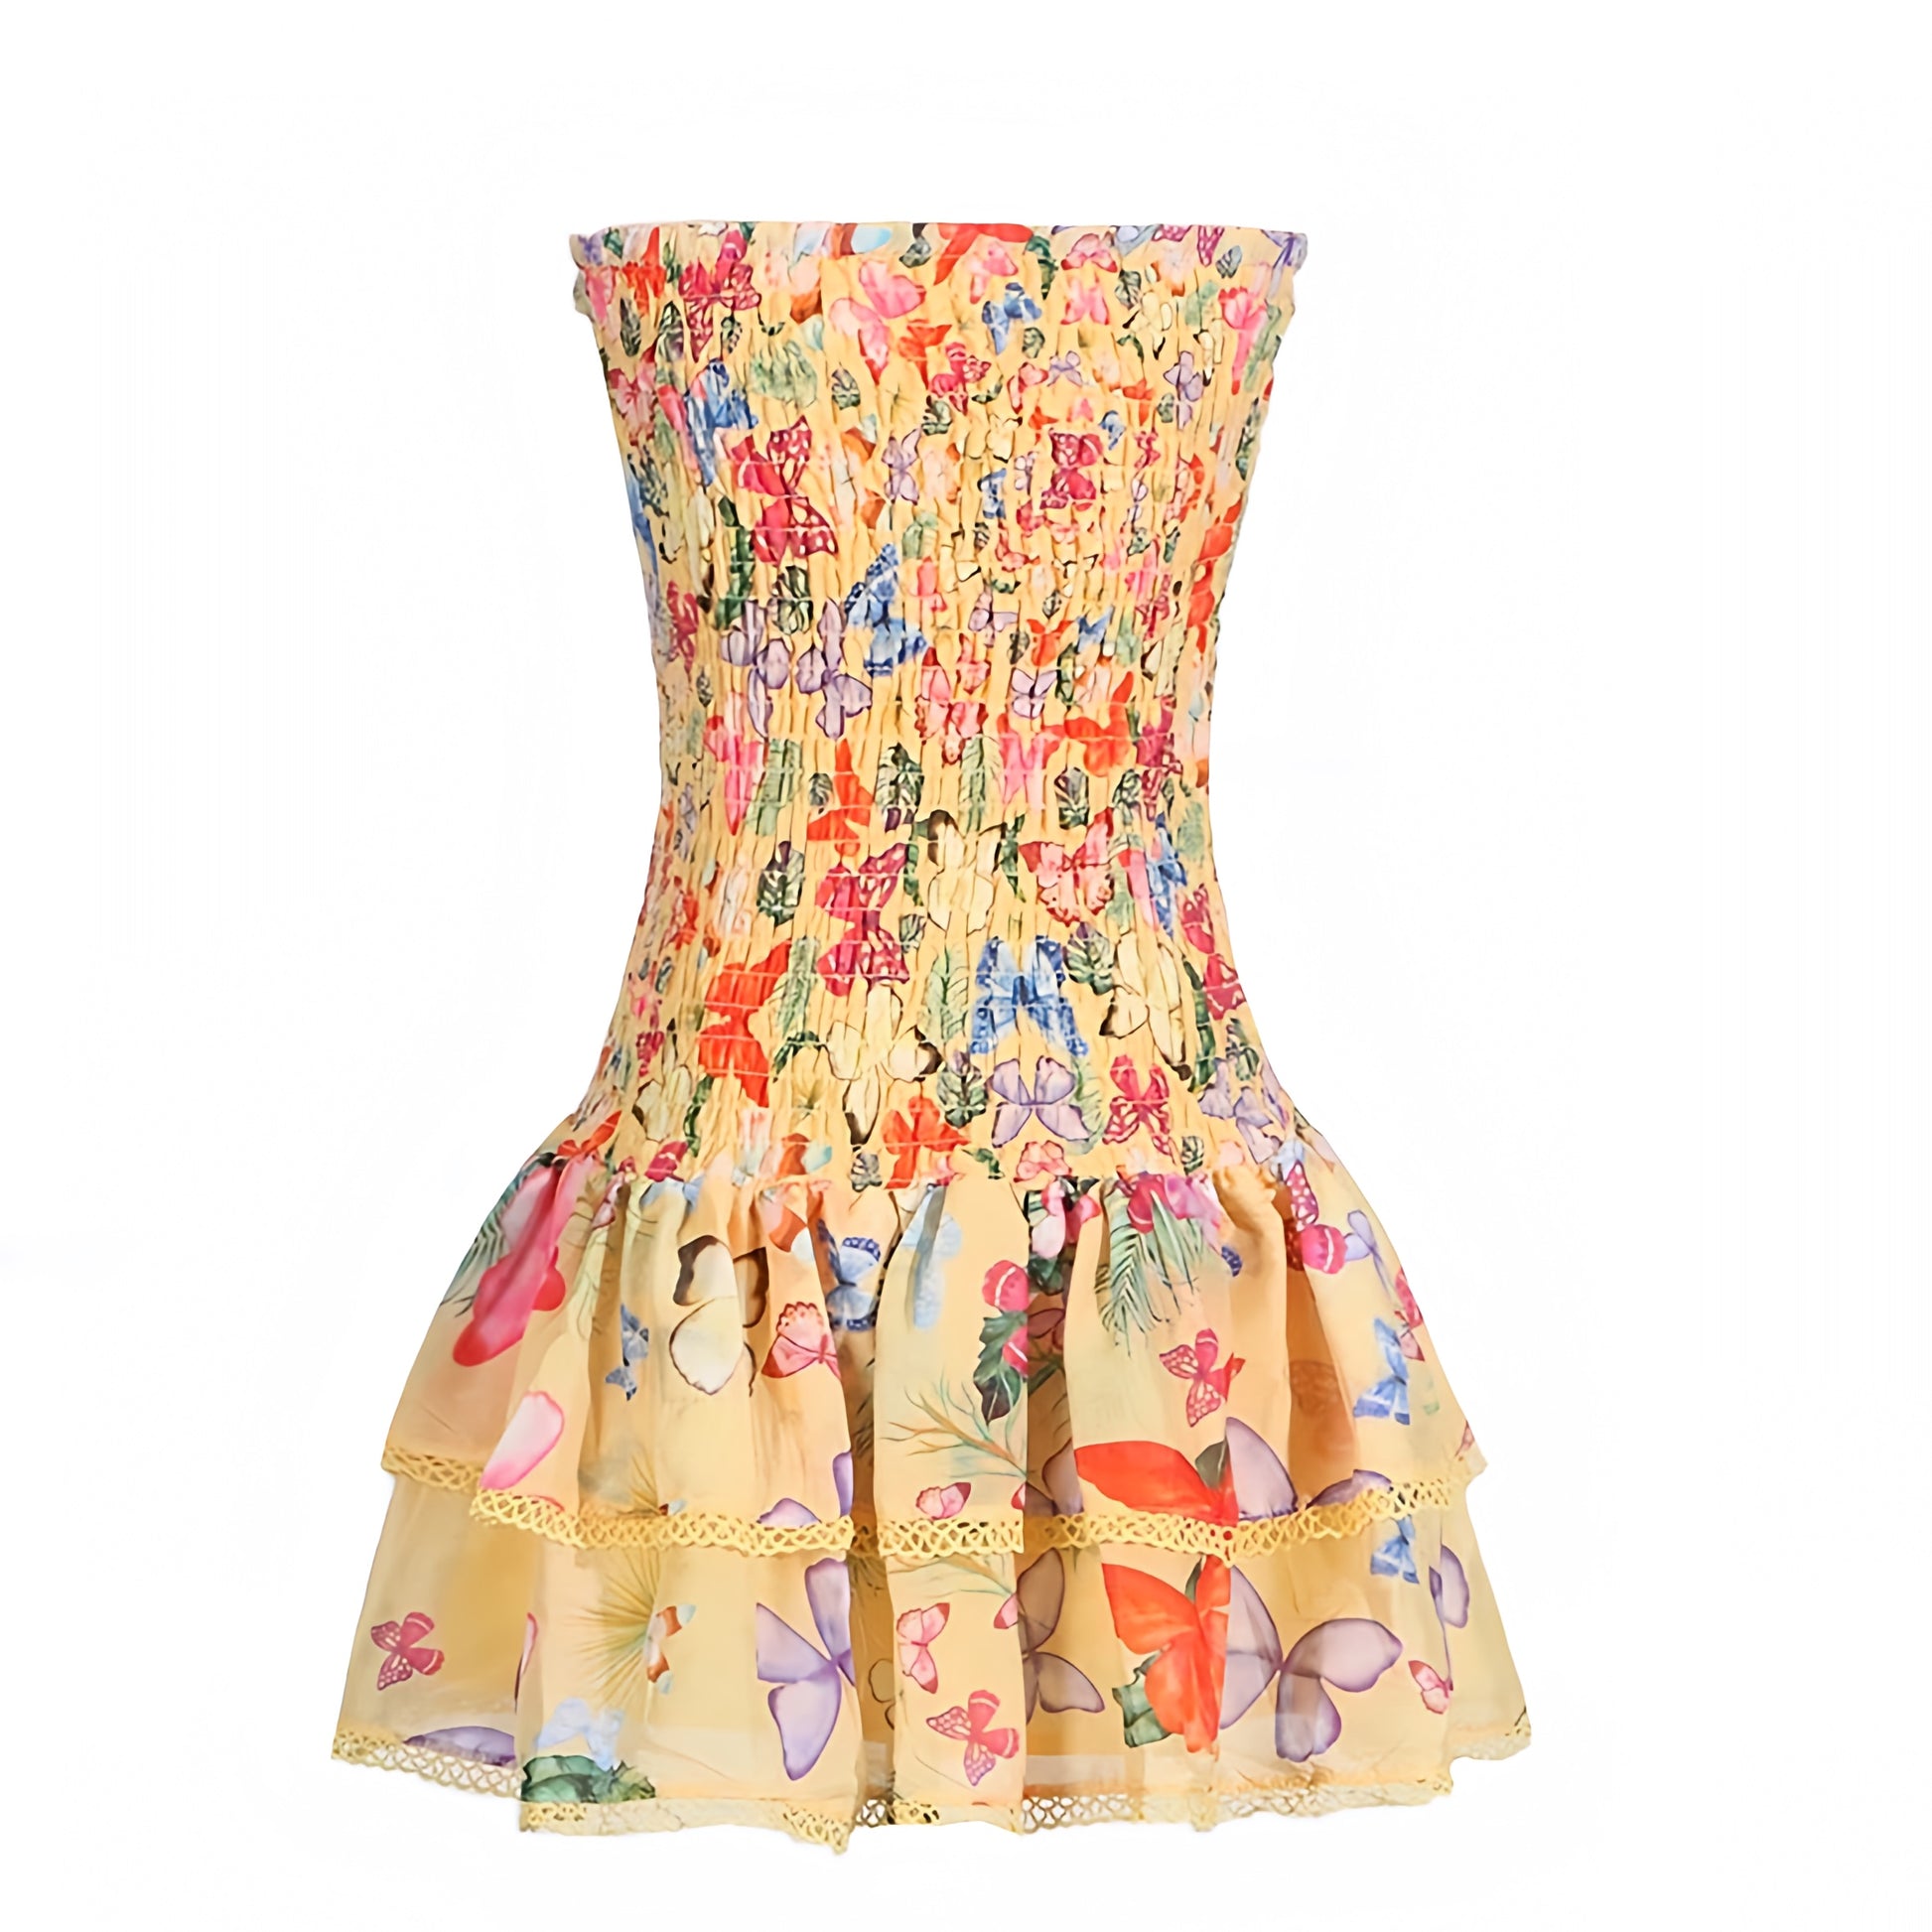 floral-print-yellow-rainbow-red-blue-pink-green-multi-color-butterfly-patterned-slim-bodycon-embroidered-layered-ruffle-trim-smocked-shirred-bodice-drop-waist-fit-and-flare-sweetheart-neckline-strapless-bandeau-sleeveless-spaghetti-strap-halter-tiered-flowy-boho-bohemian-short-mini-dress-couture-women-ladies-teens-tweens-chic-trendy-spring-2024-summer-elegant-semi-formal-casual-feminine-preppy-style-prom-homecoming-party-tropical-european-sundress-charo-ruiz-zimmerman-altard-state-loveshackfancy-dupe